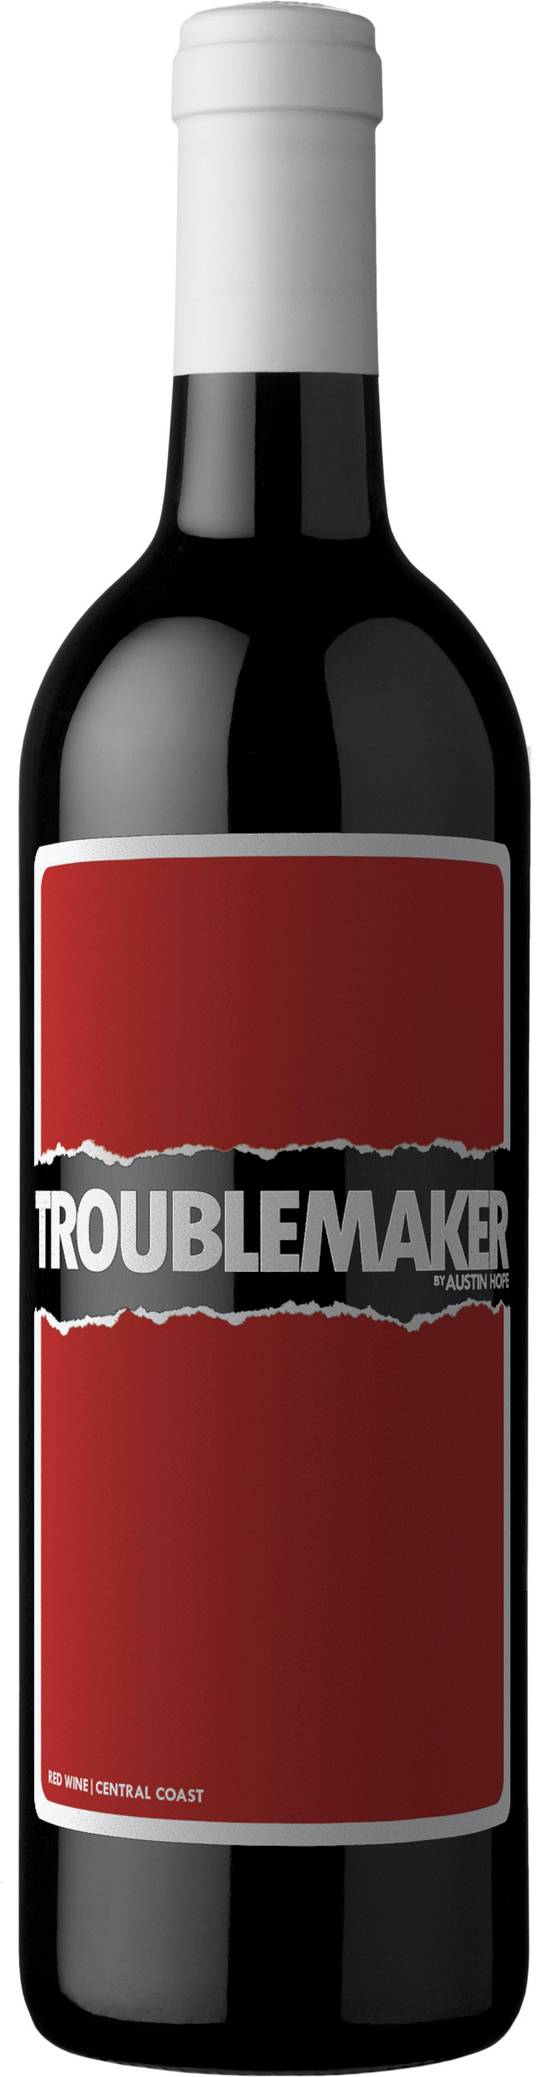 Troublemaker Red Blend Wine (750 ml)